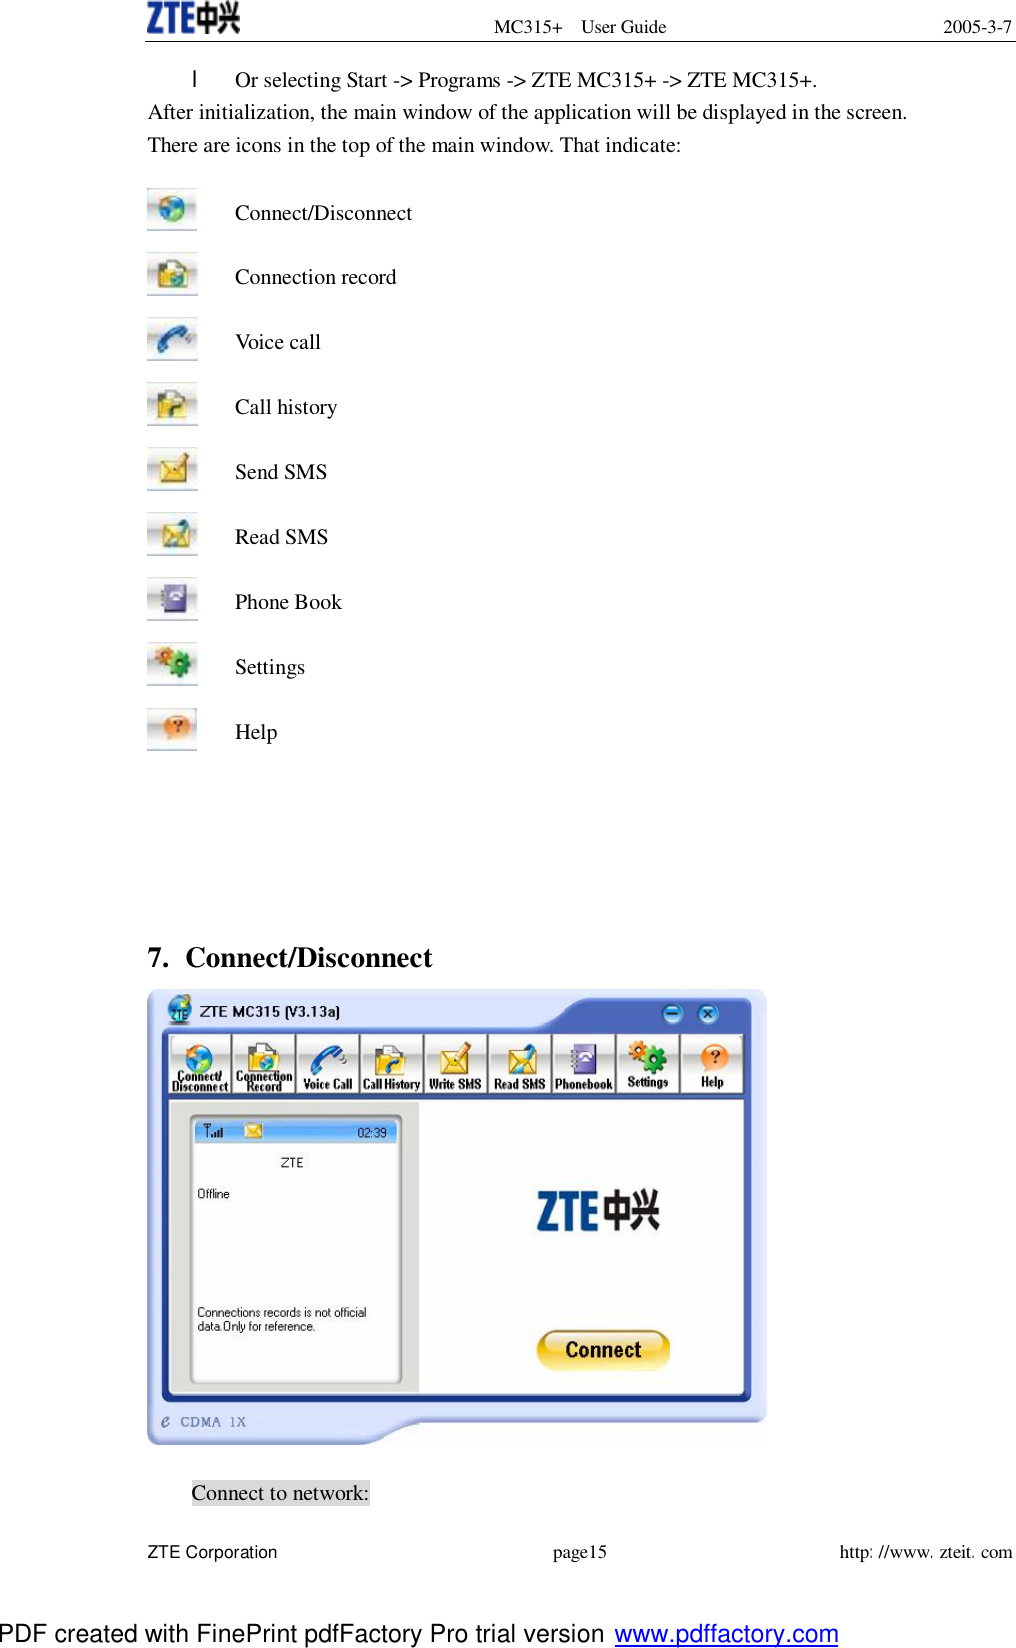  MC315+ User Guide 2005-3-7  ZTE Corporation page15 http://www.zteit.com l Or selecting Start -&gt; Programs -&gt; ZTE MC315+ -&gt; ZTE MC315+. After initialization, the main window of the application will be displayed in the screen. There are icons in the top of the main window. That indicate:  Connect/Disconnect  Connection record  Voice call  Call history  Send SMS  Read SMS  Phone Book  Settings  Help      7. Connect/Disconnect   Connect to network: PDF created with FinePrint pdfFactory Pro trial version www.pdffactory.com